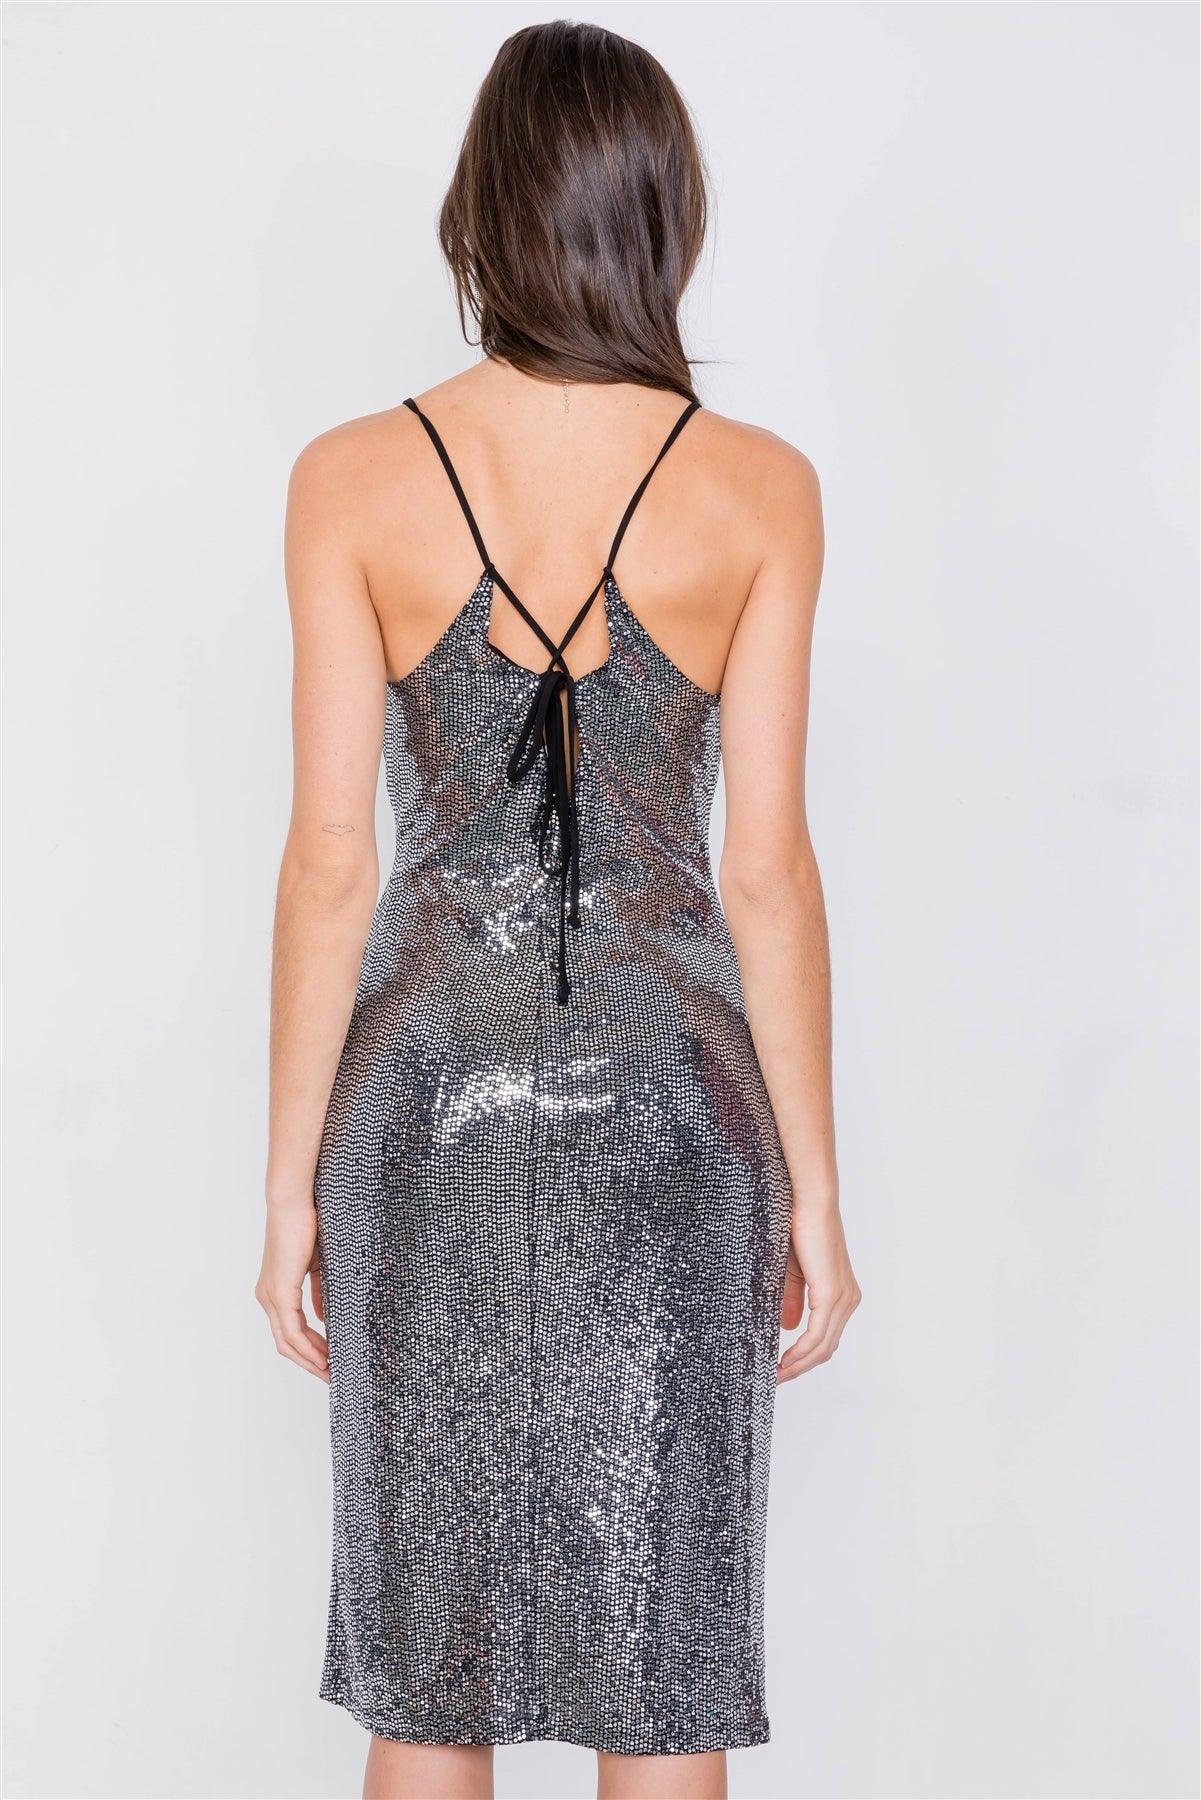 Silver & Black Sequin Square Neck Lace-Up Back Party Dress